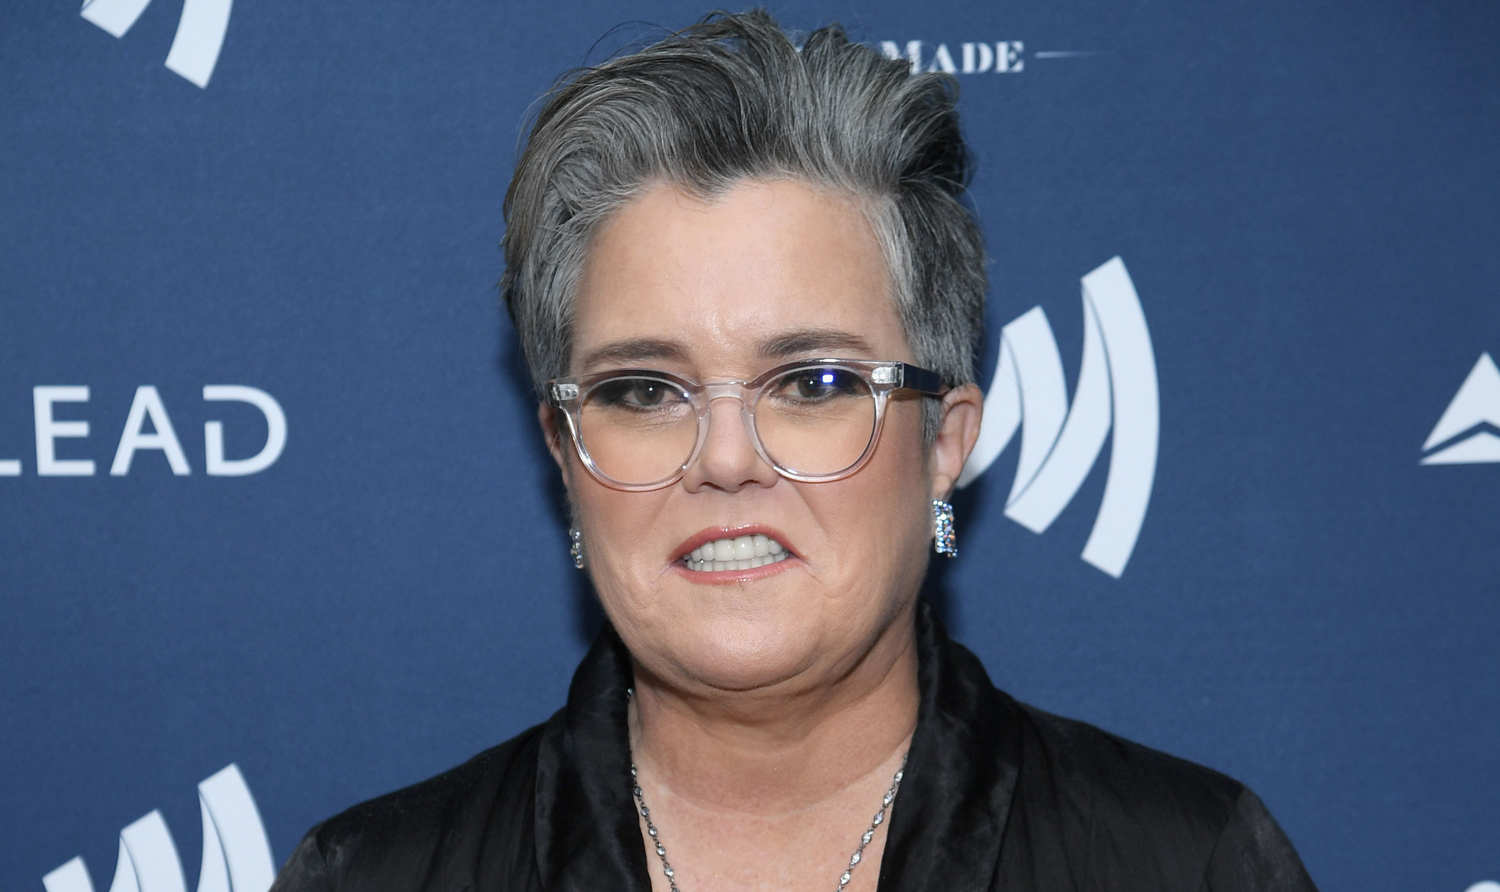 Rosie O’Donnell Show' Comeback Special Raises $500,000 for T